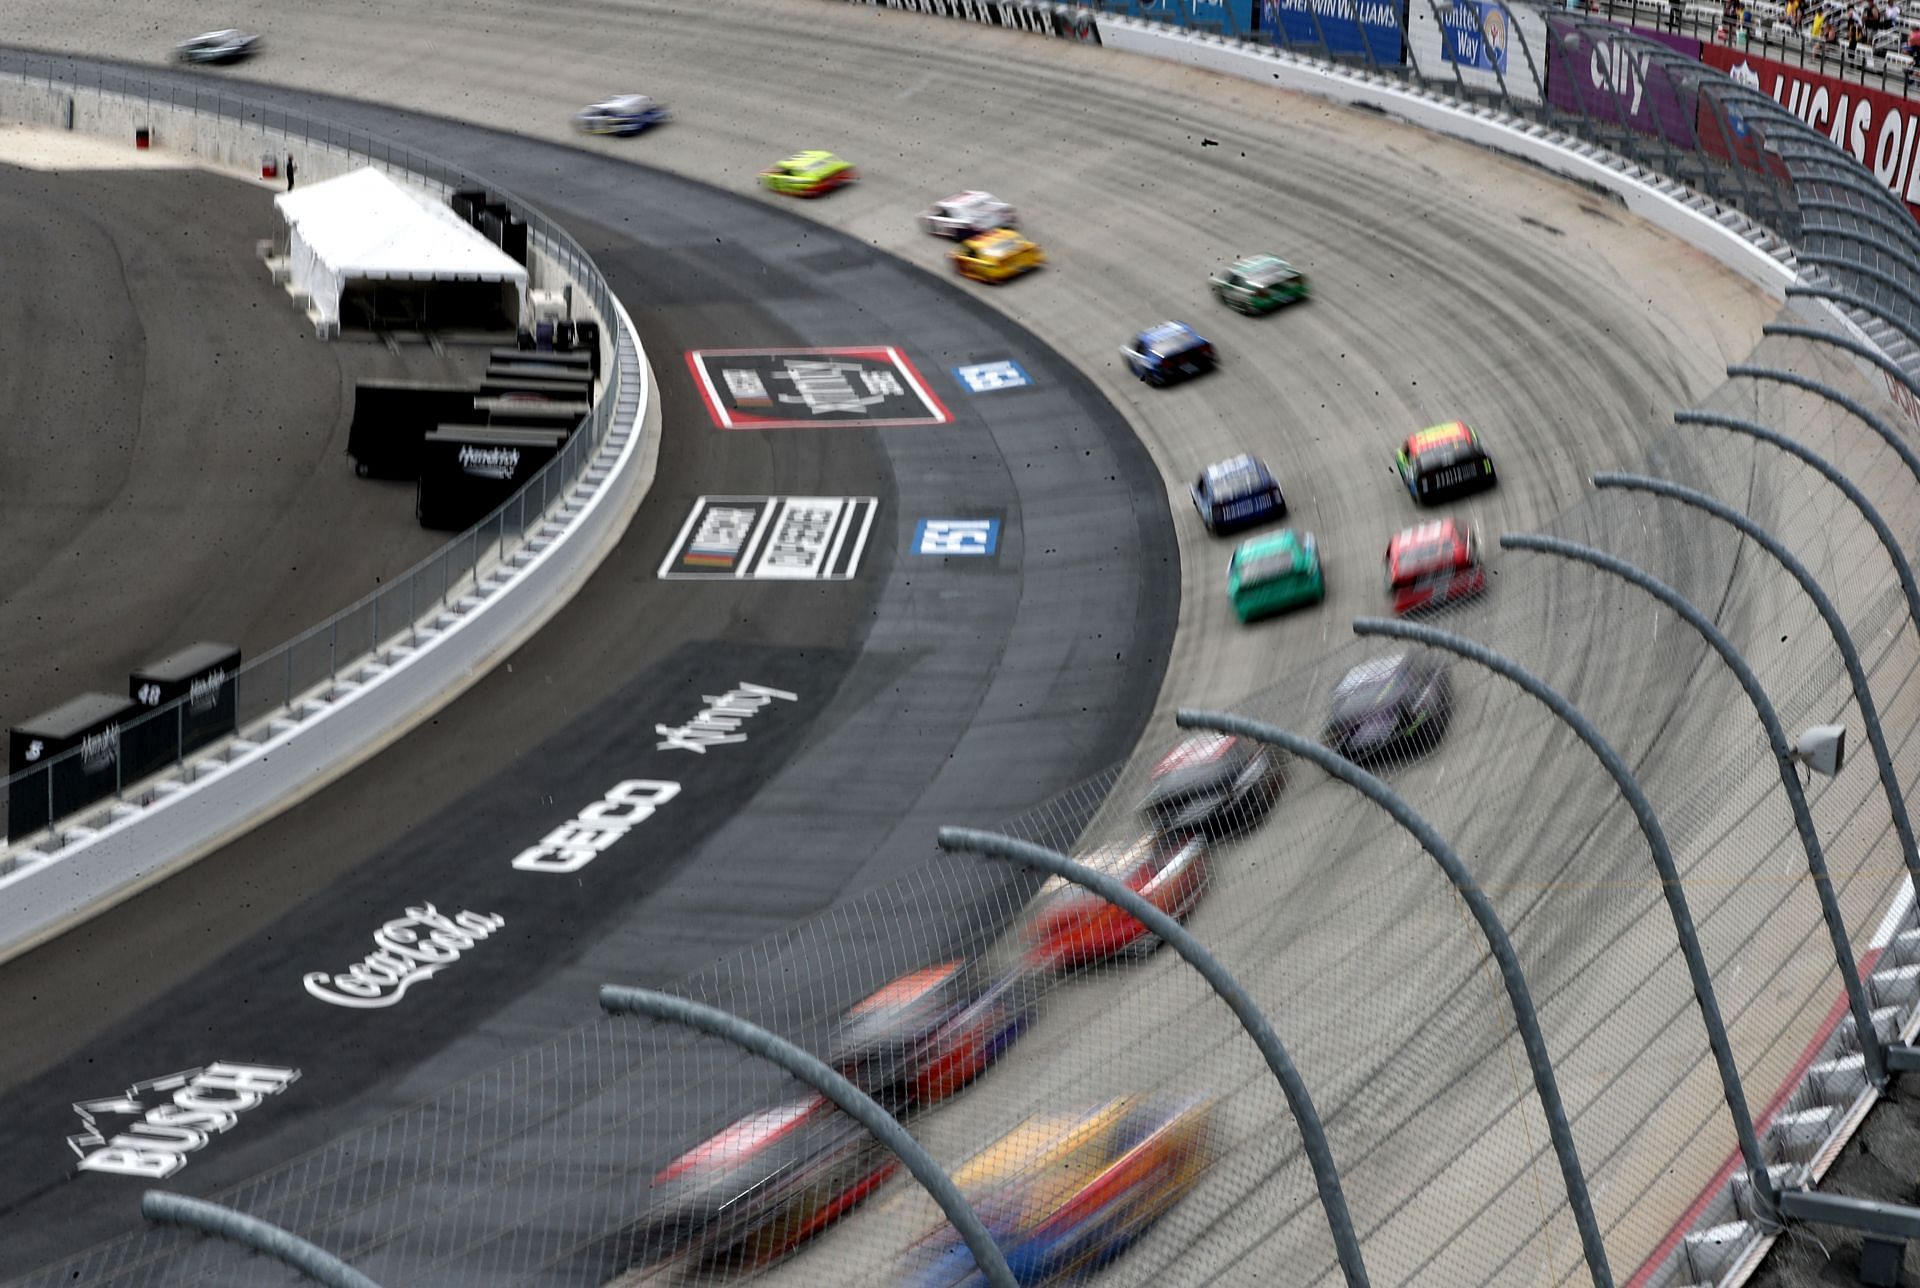 A general view of cars racing during the NASCAR Cup Series Drydene 400 at Dover International Speedway (Photo by James Gilbert/Getty Images)